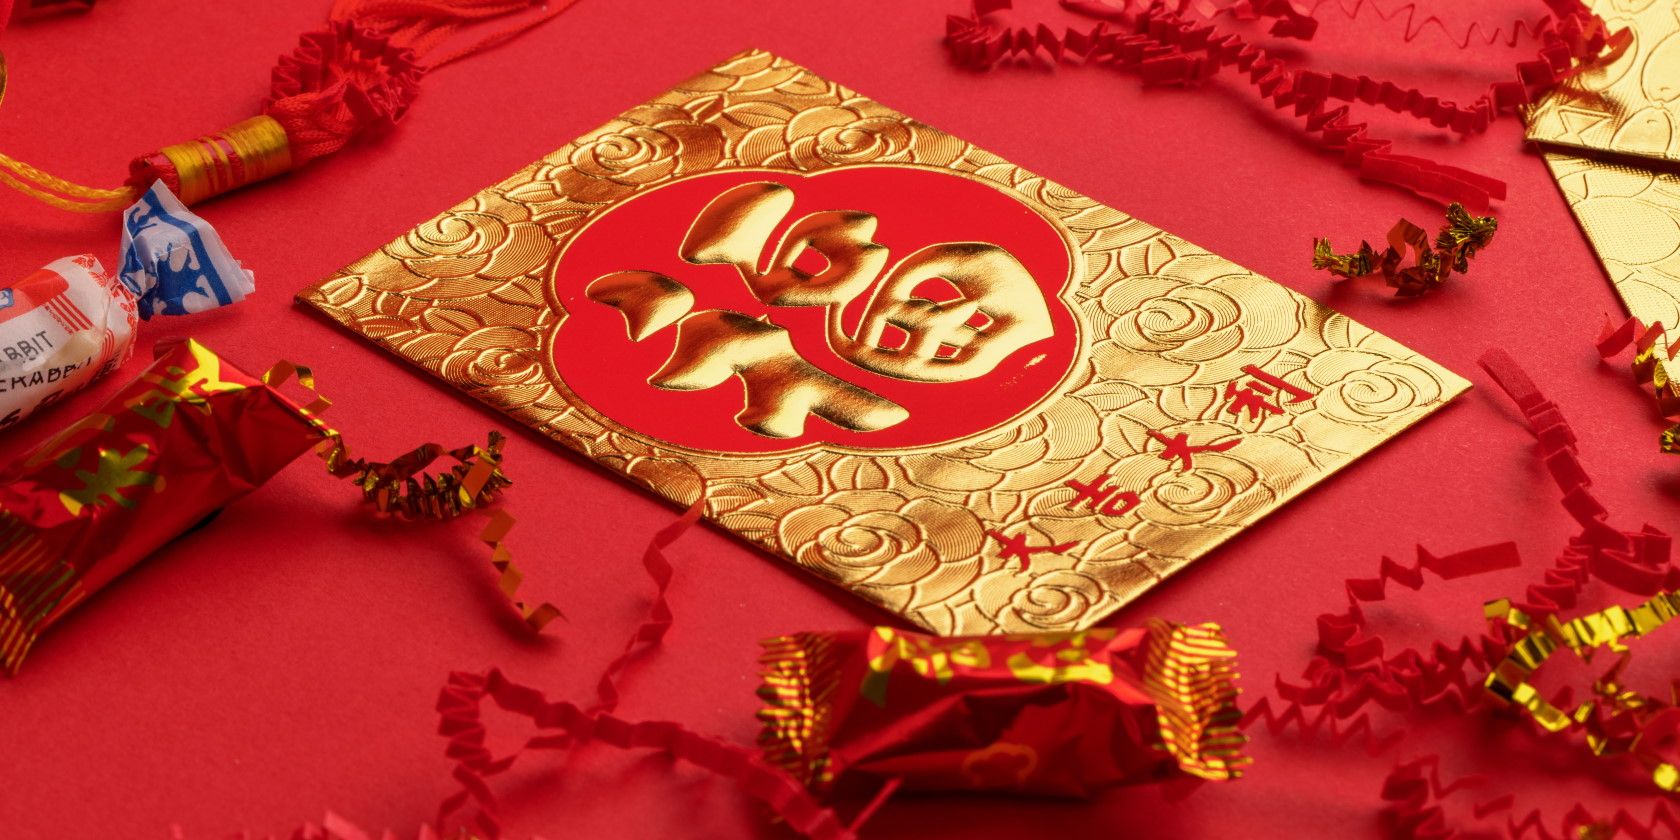 Gold and red Chinese New year letter on red tablecloth surrounded by chinese candy